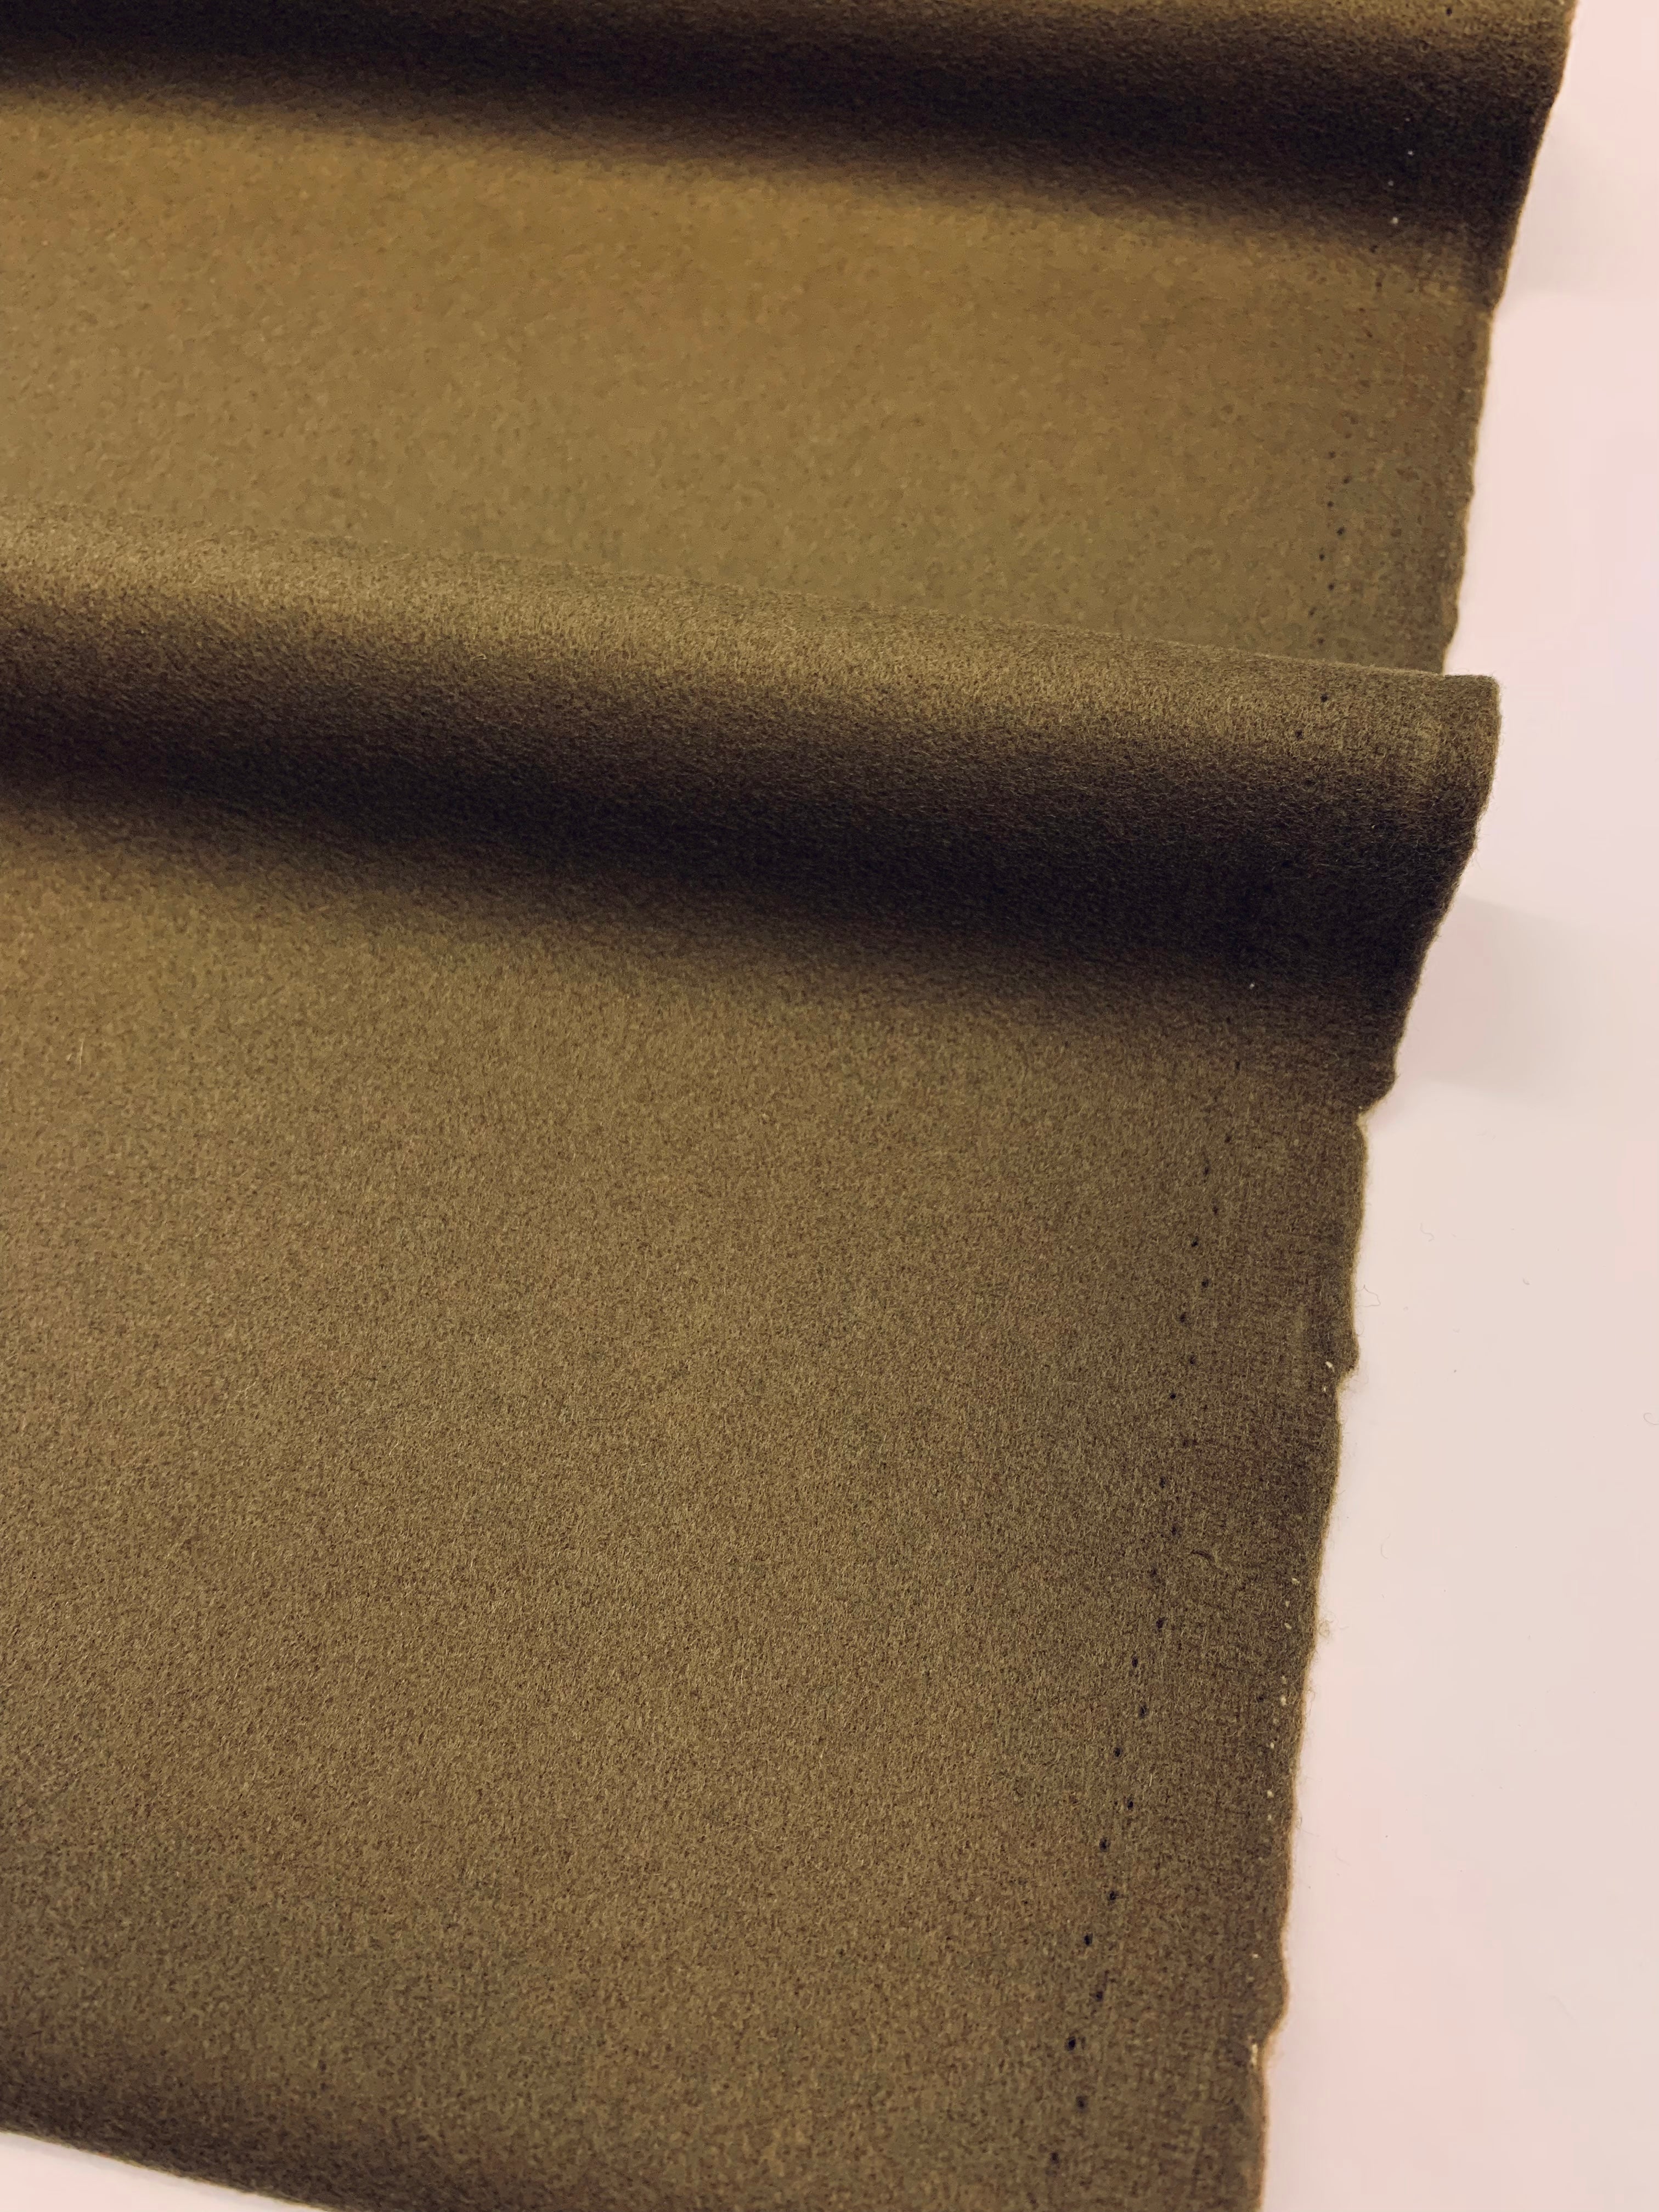 OLIVE wool mix coating fabric/ DEADSTOCK